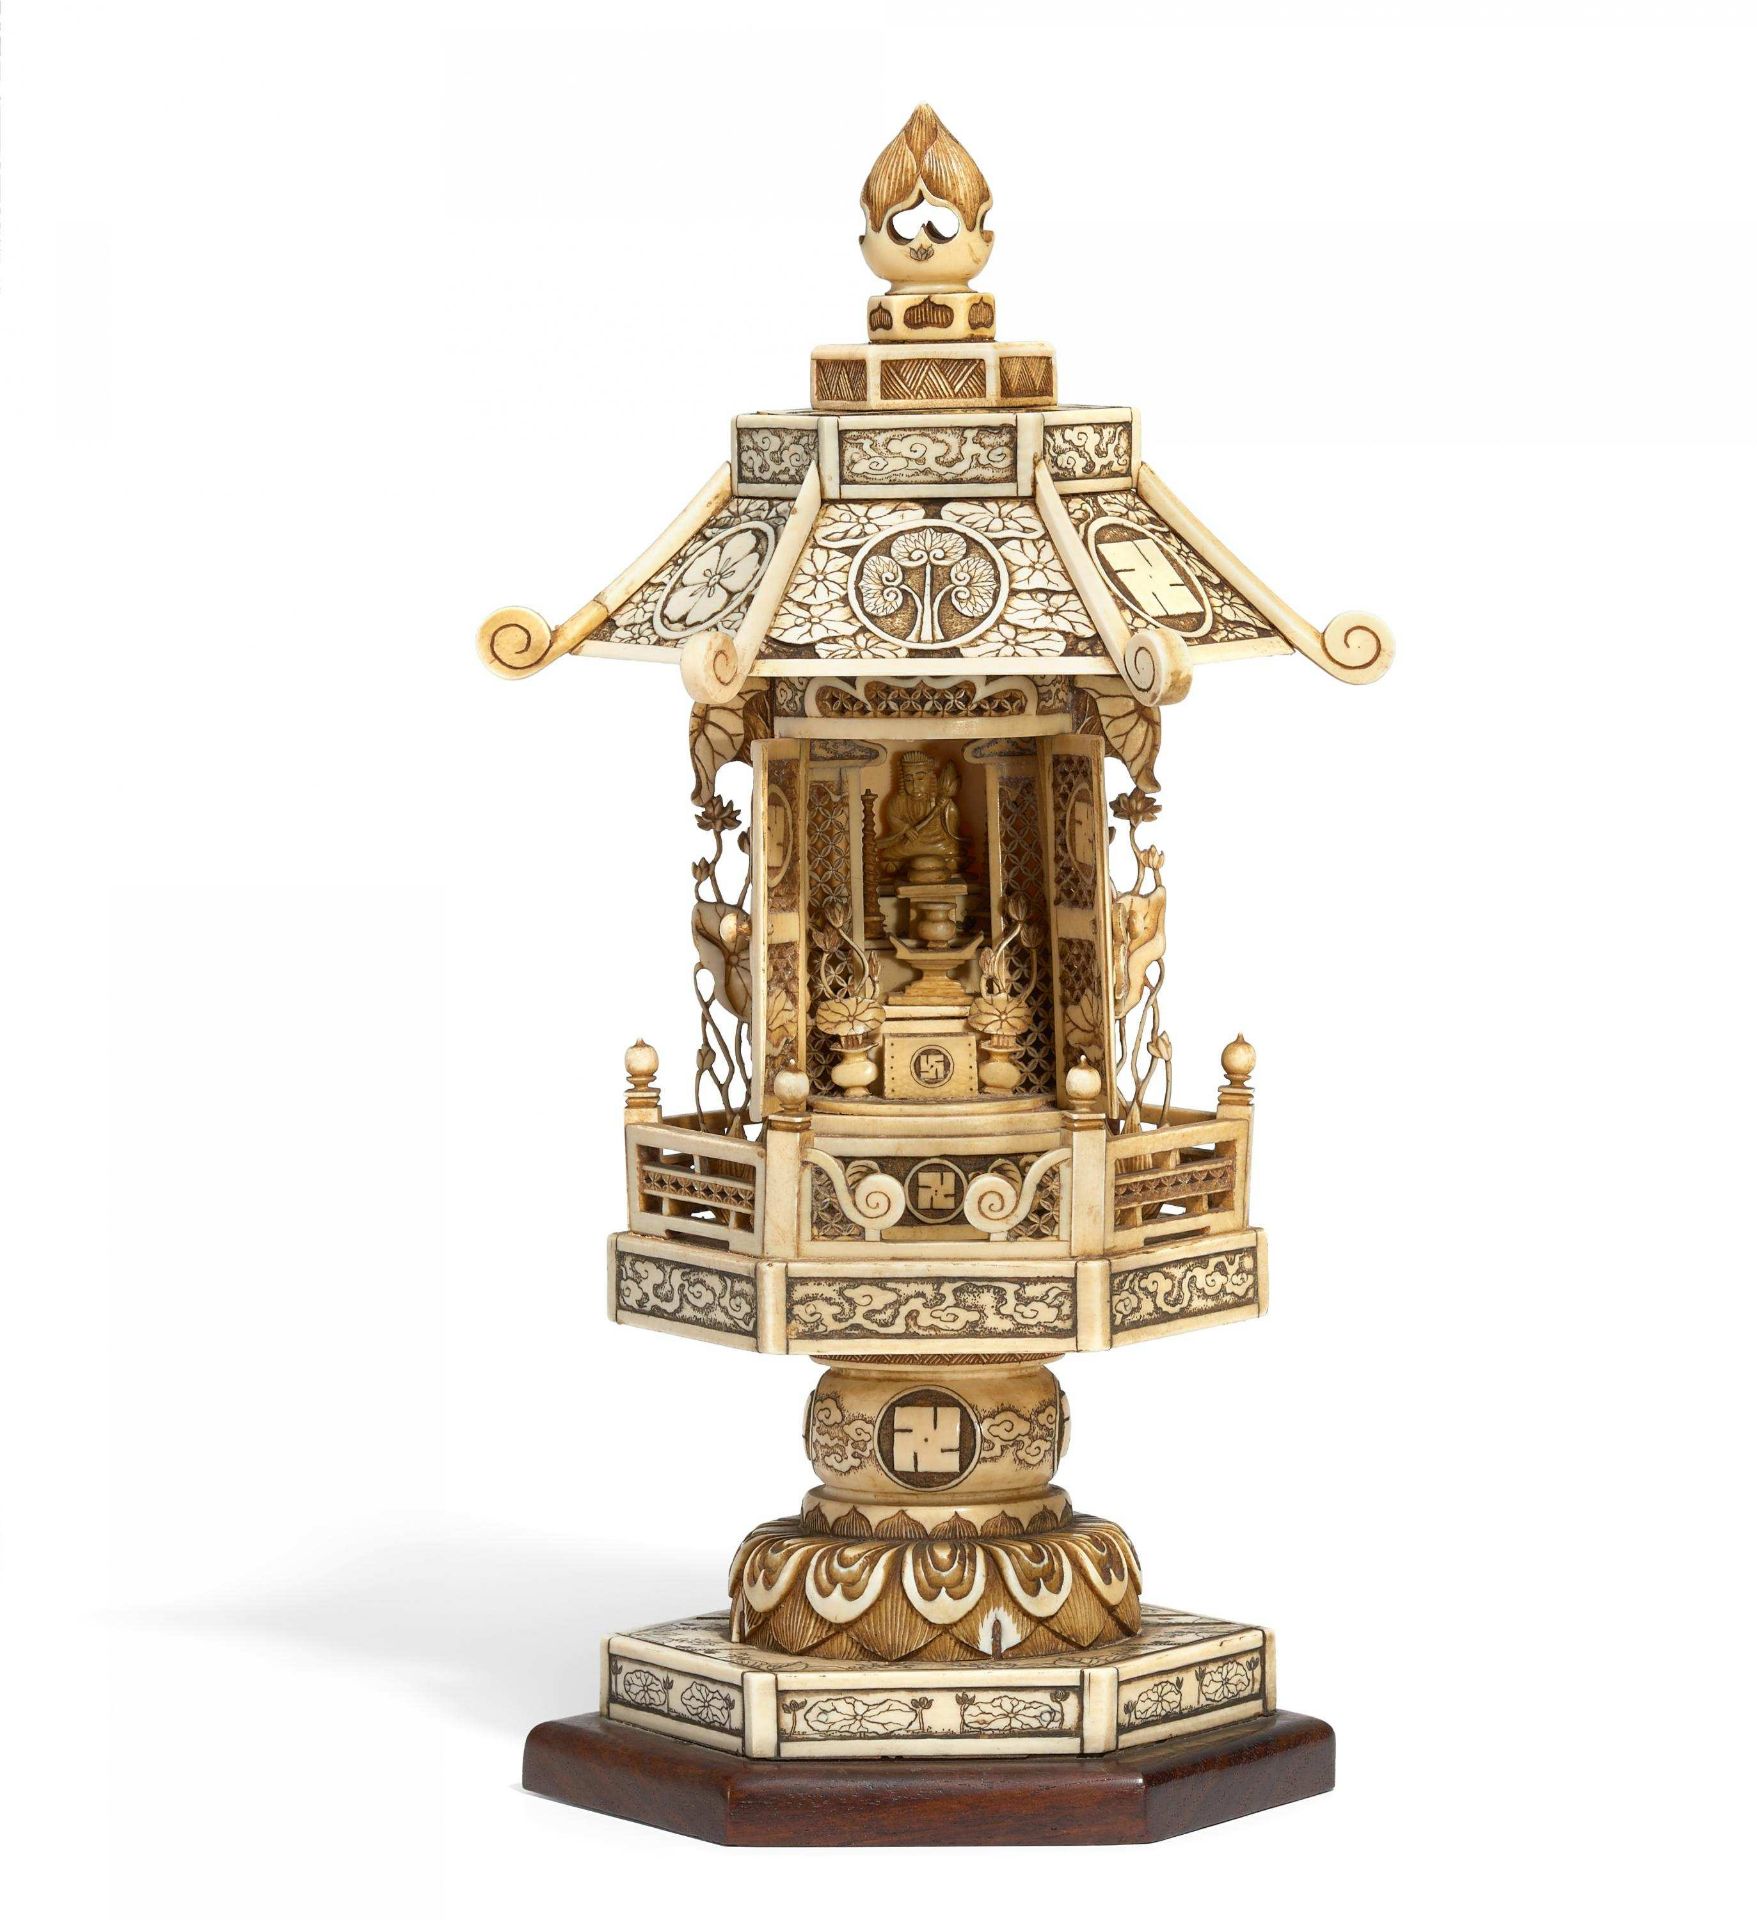 SHRINE OF DENGYÔ DAISHI SAICHÔ. Japan. Meiji period. About 1900. Bone, finely carved and graved. The